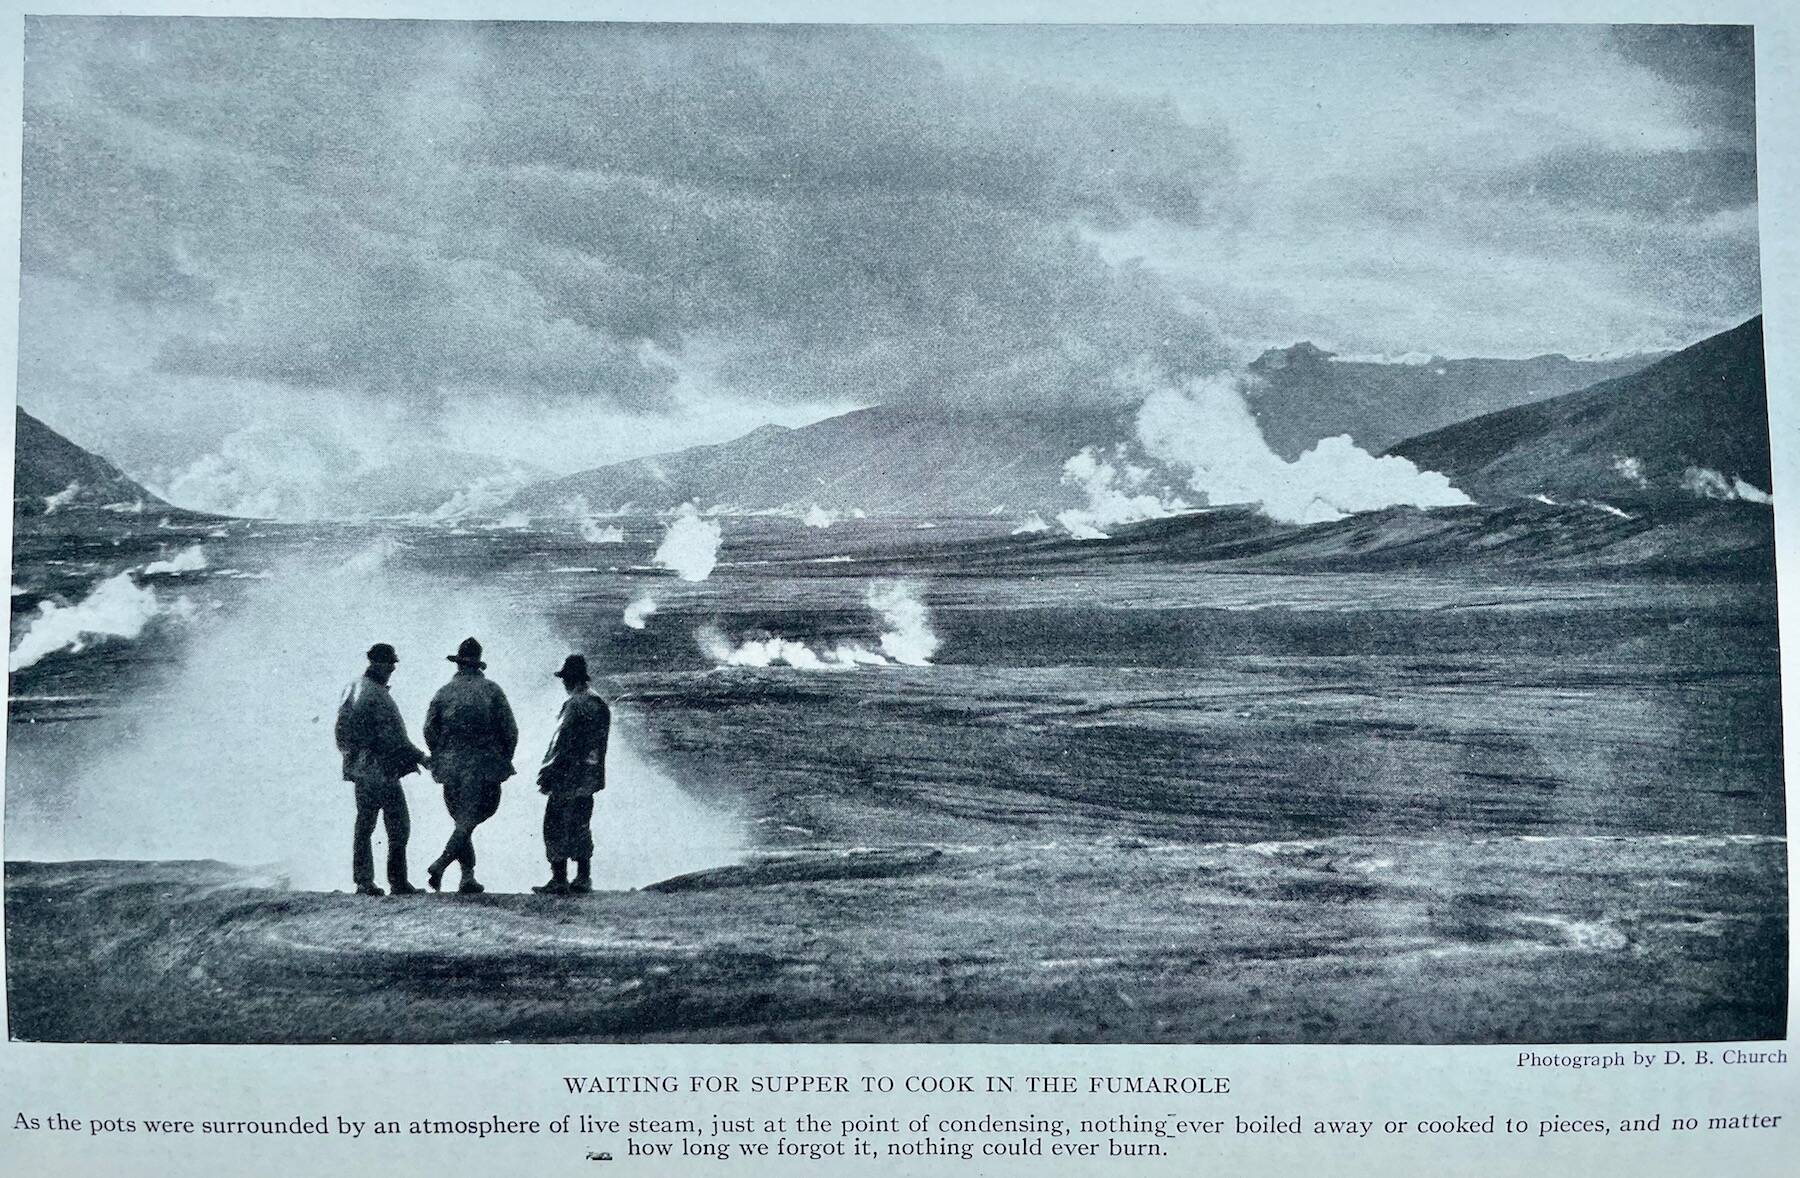 Explorers of the Valley of 10,000 Smokes after its eruption in 1912 stand at a campsite above the valley floor. (L.G. Folsom, from the book “The Valley of 10,000 Smokes” by Robert Griggs)